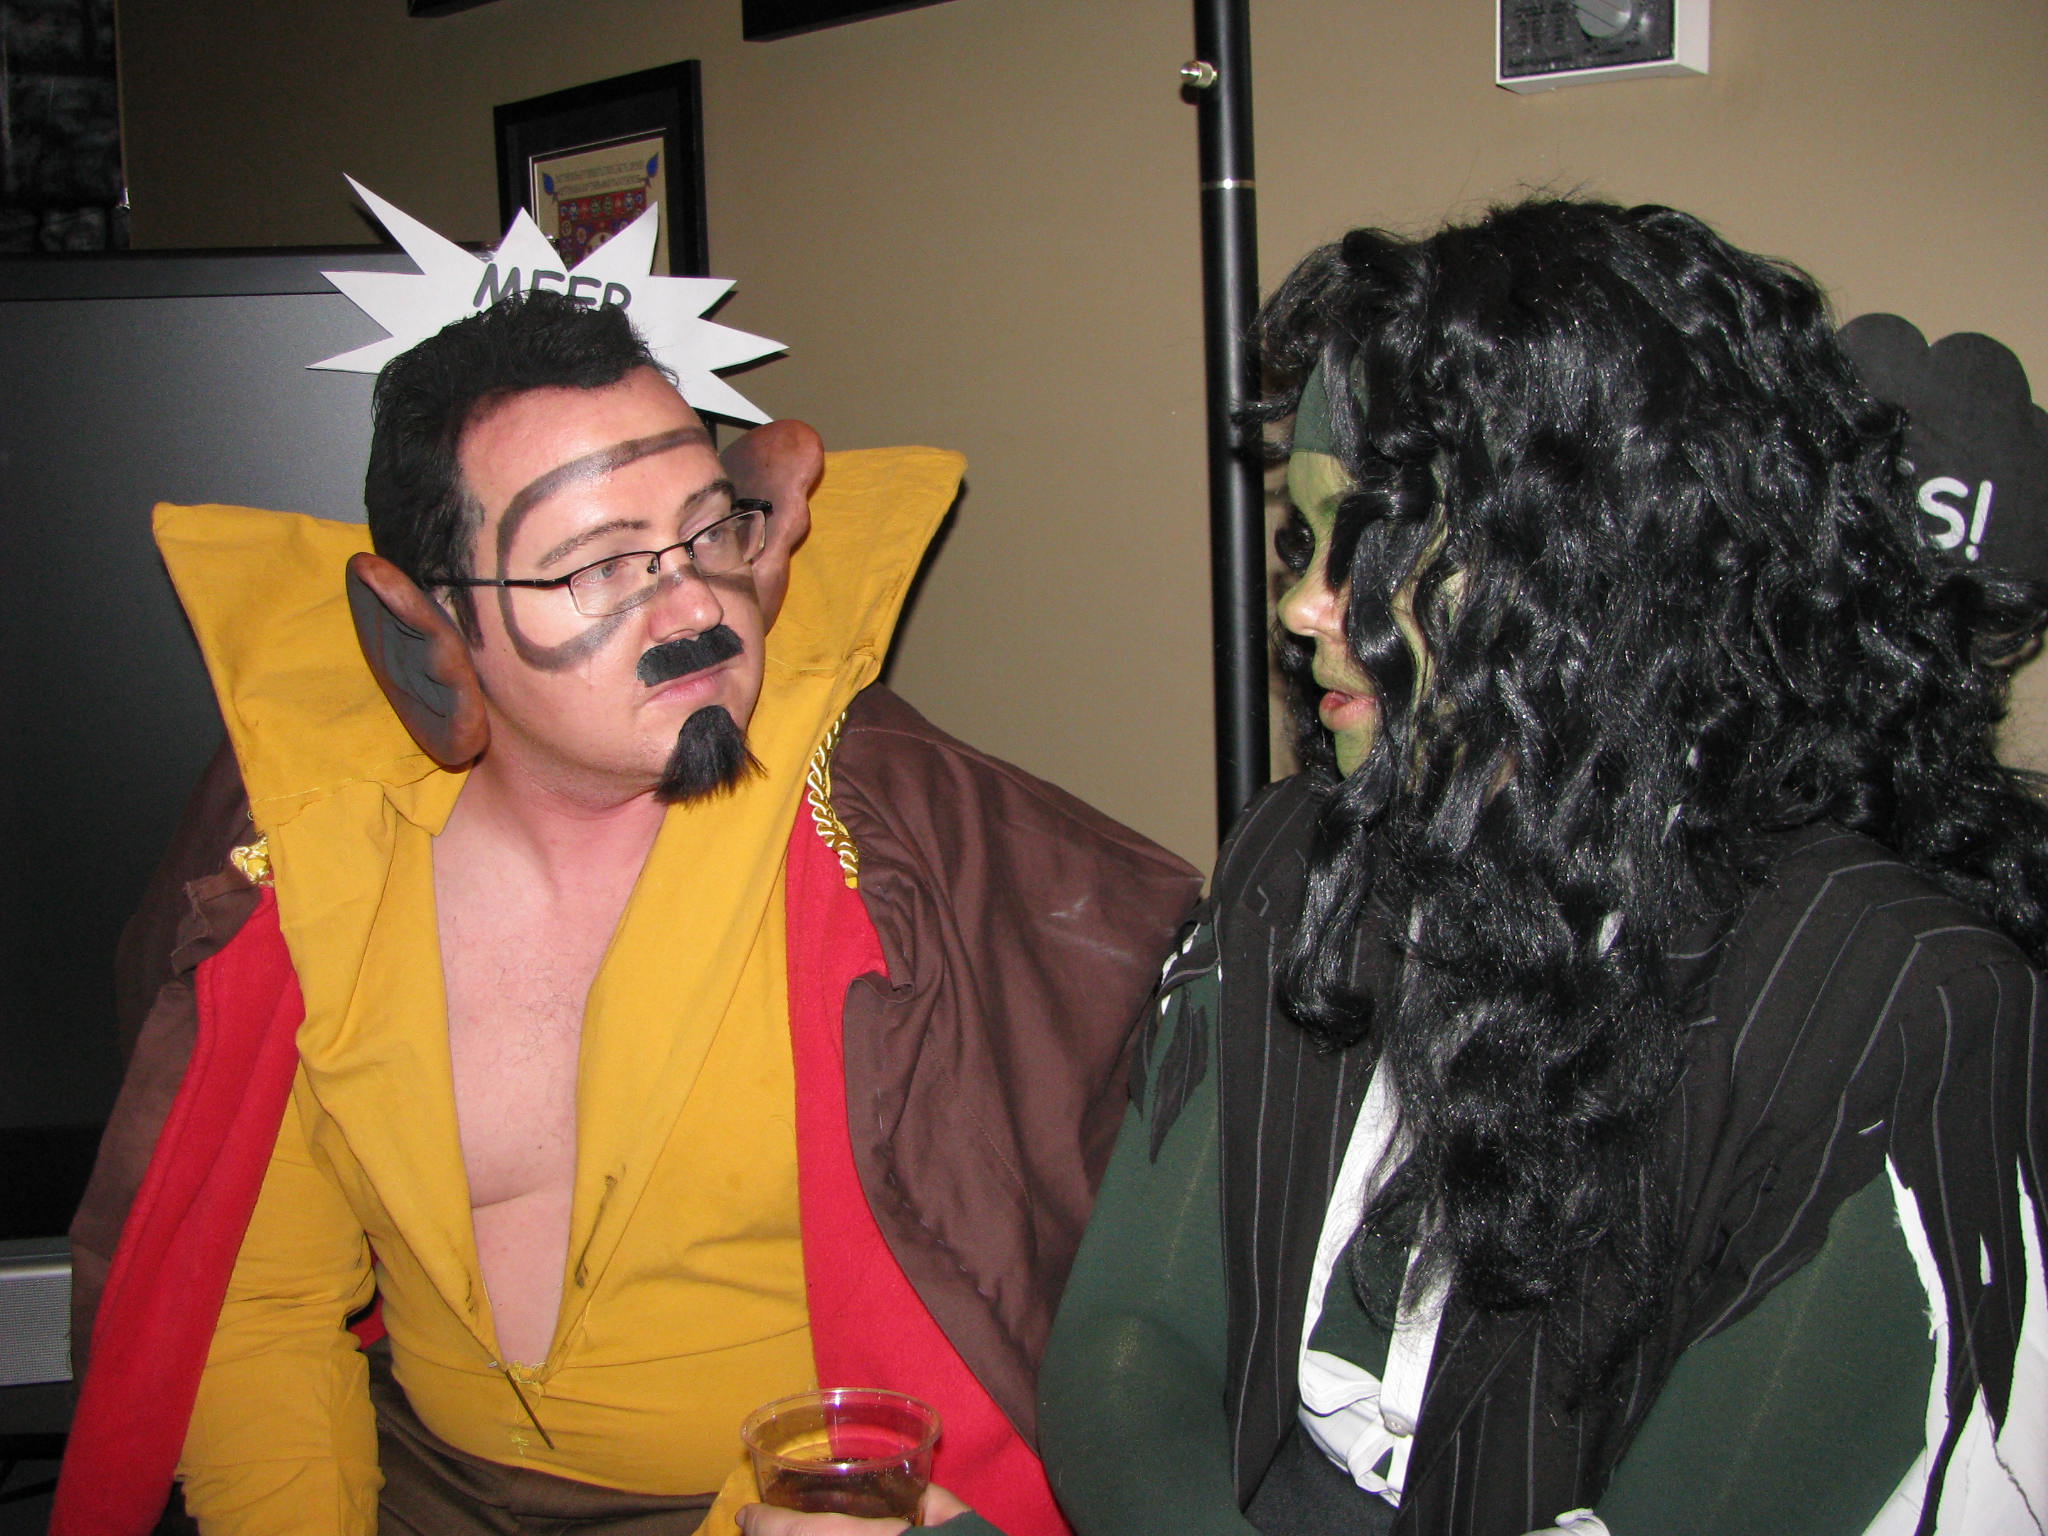 two people are dressed as goofy and a man with weird clothes